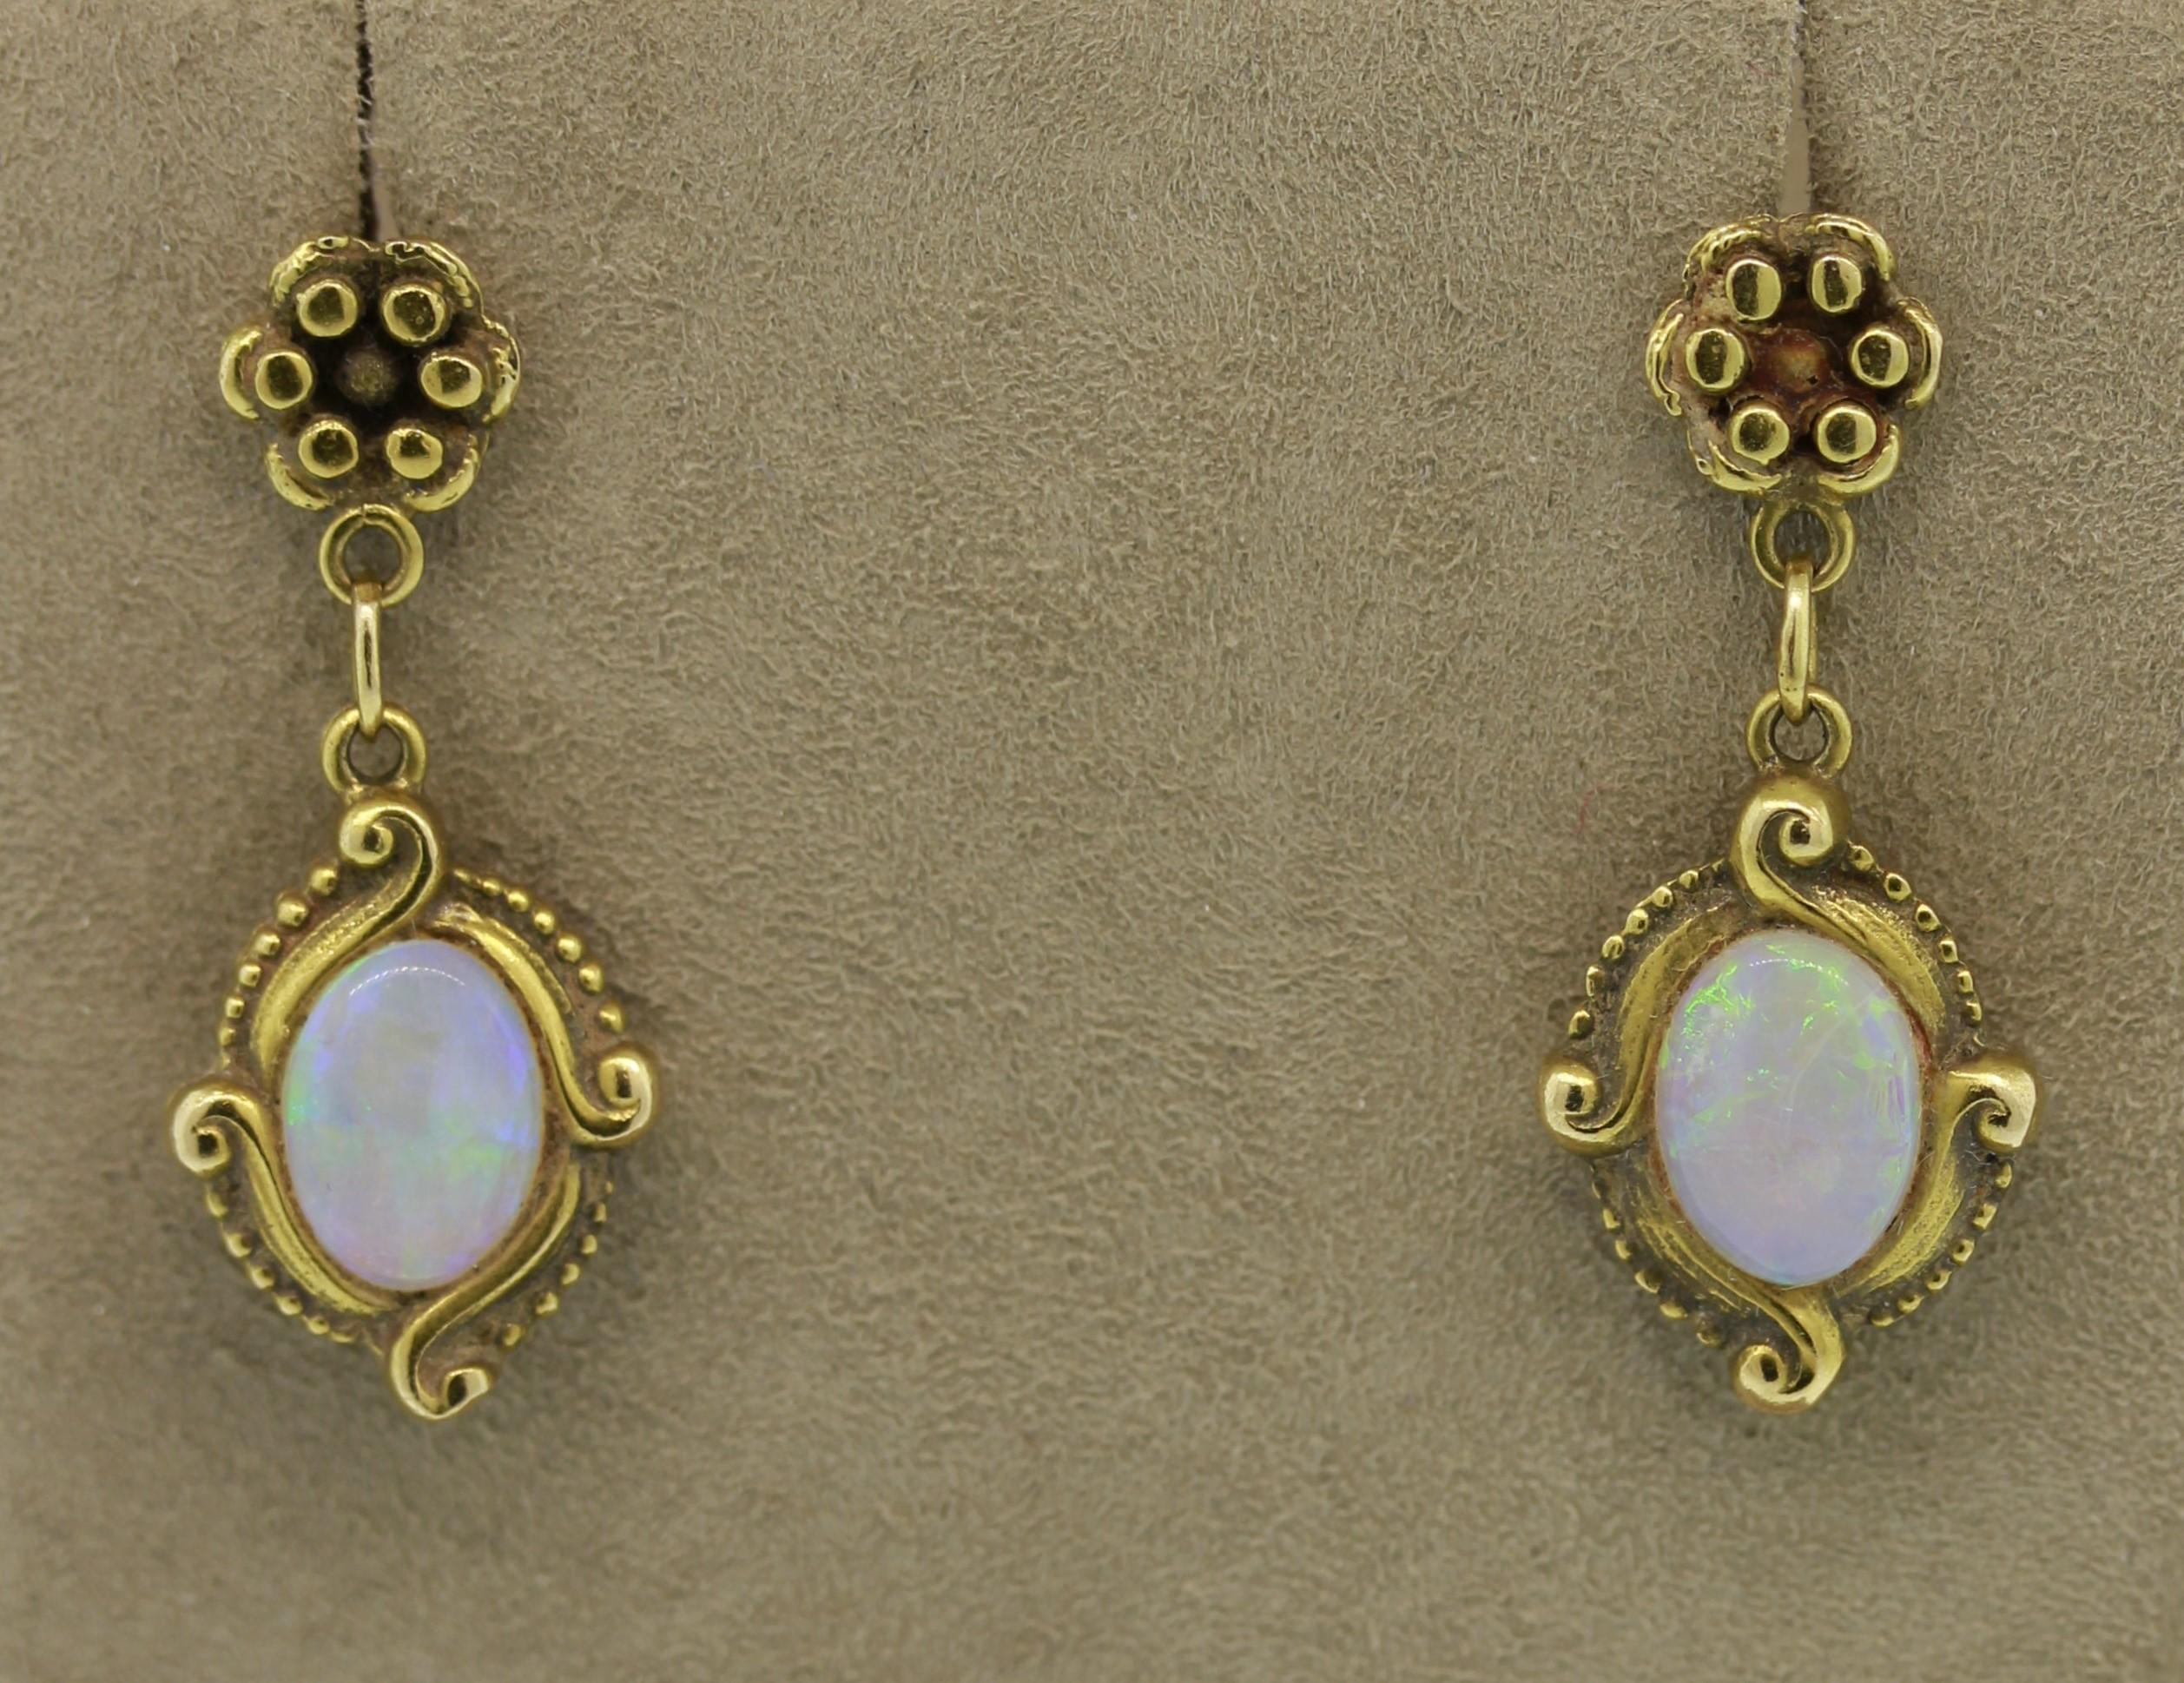 An Art Nouveau treasure from the turn of the 20th century, there earrings feature 2 Australian crystal opals. They are set in hand fabricated 14k yellow gold with filigree work around the setting and flowers studded on top.

 

Length: 1 inch